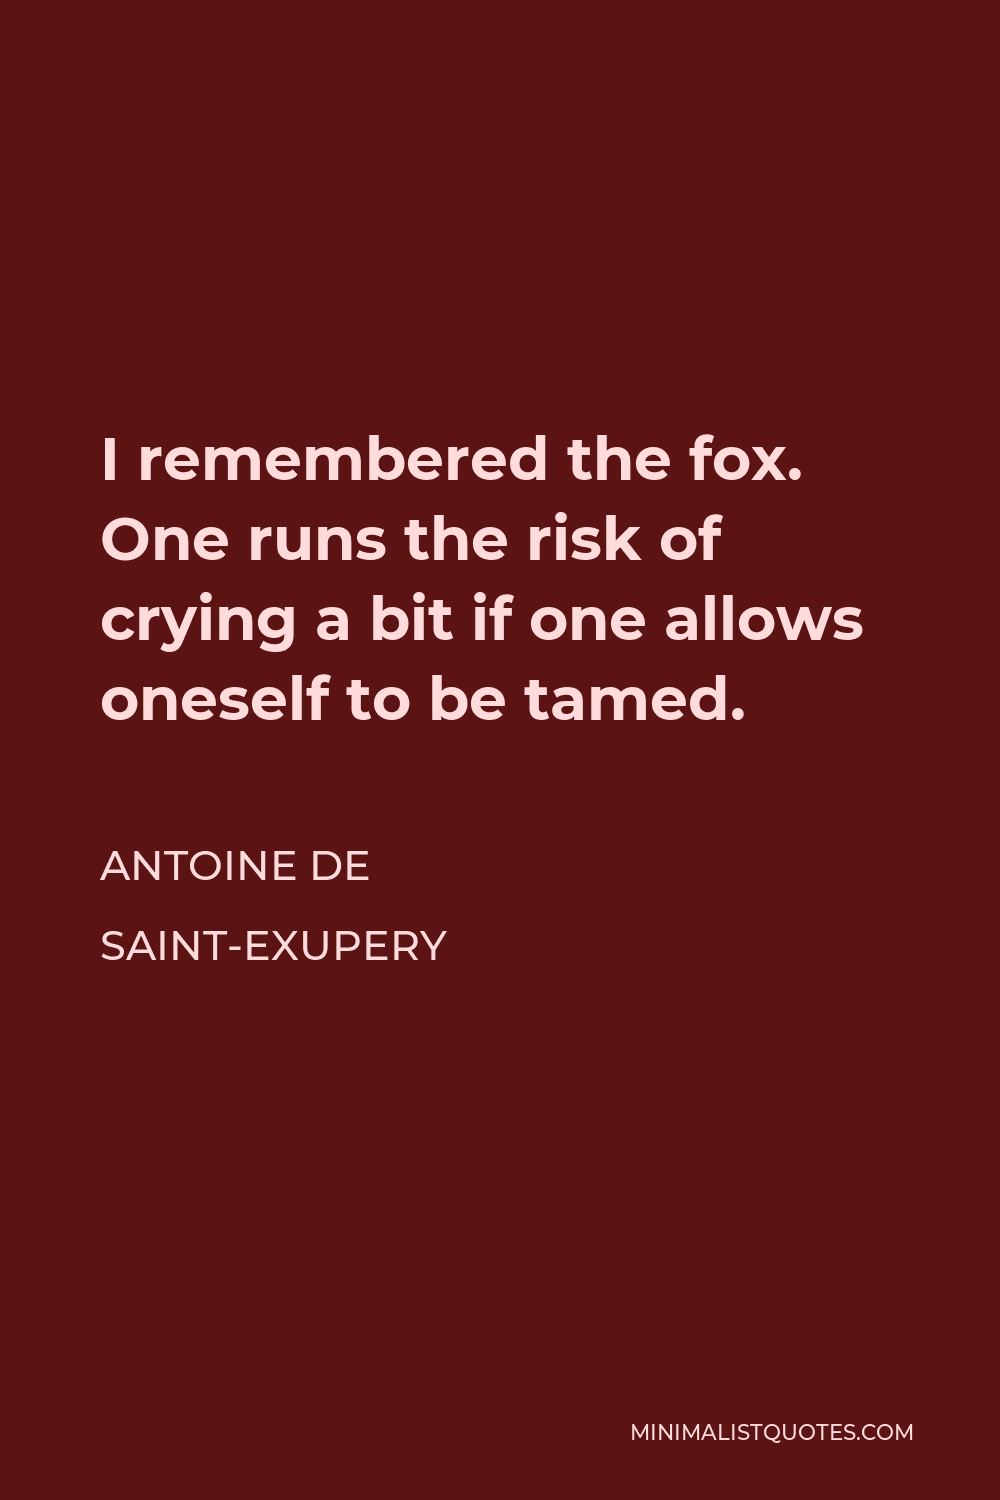 Antoine de Saint-Exupery Quote - I remembered the fox. One runs the risk of crying a bit if one allows oneself to be tamed.